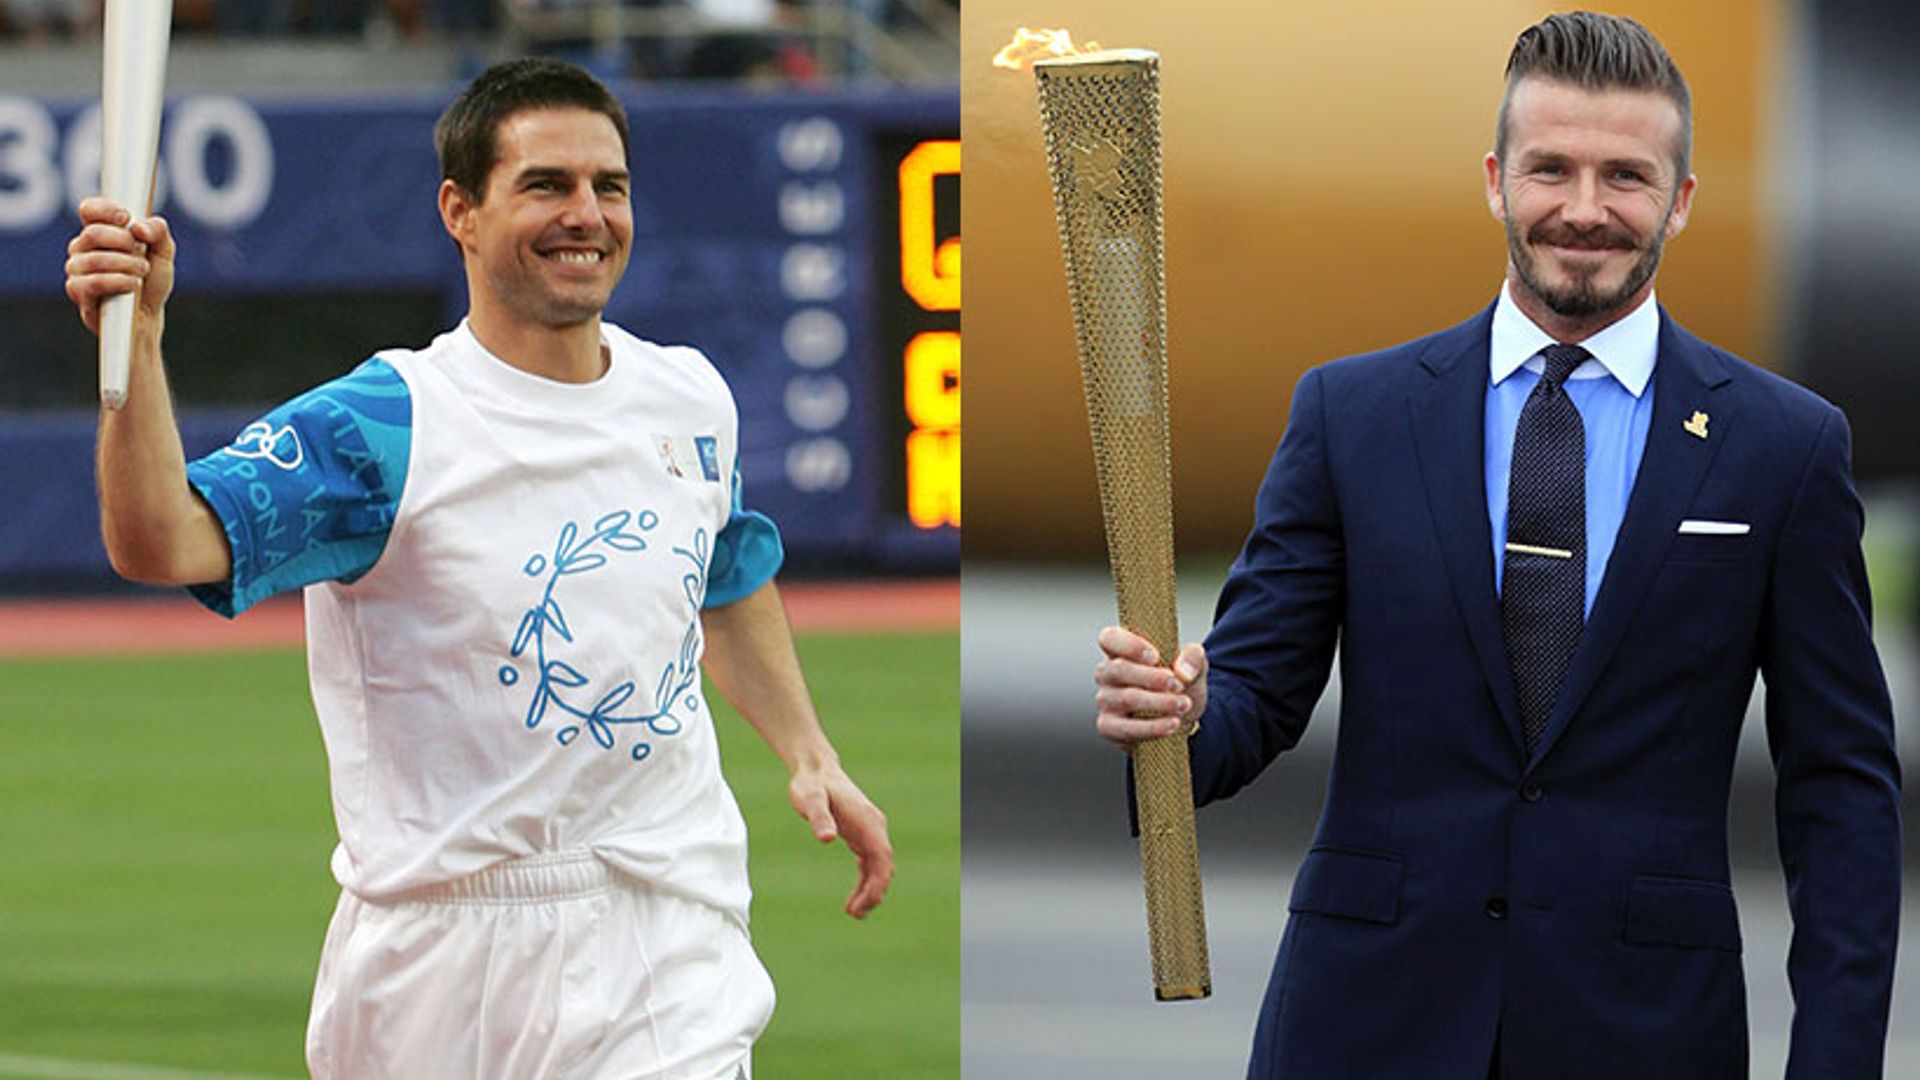 From David Beckham to Tom Cruise: the celebrities who have carried the Olympic torch